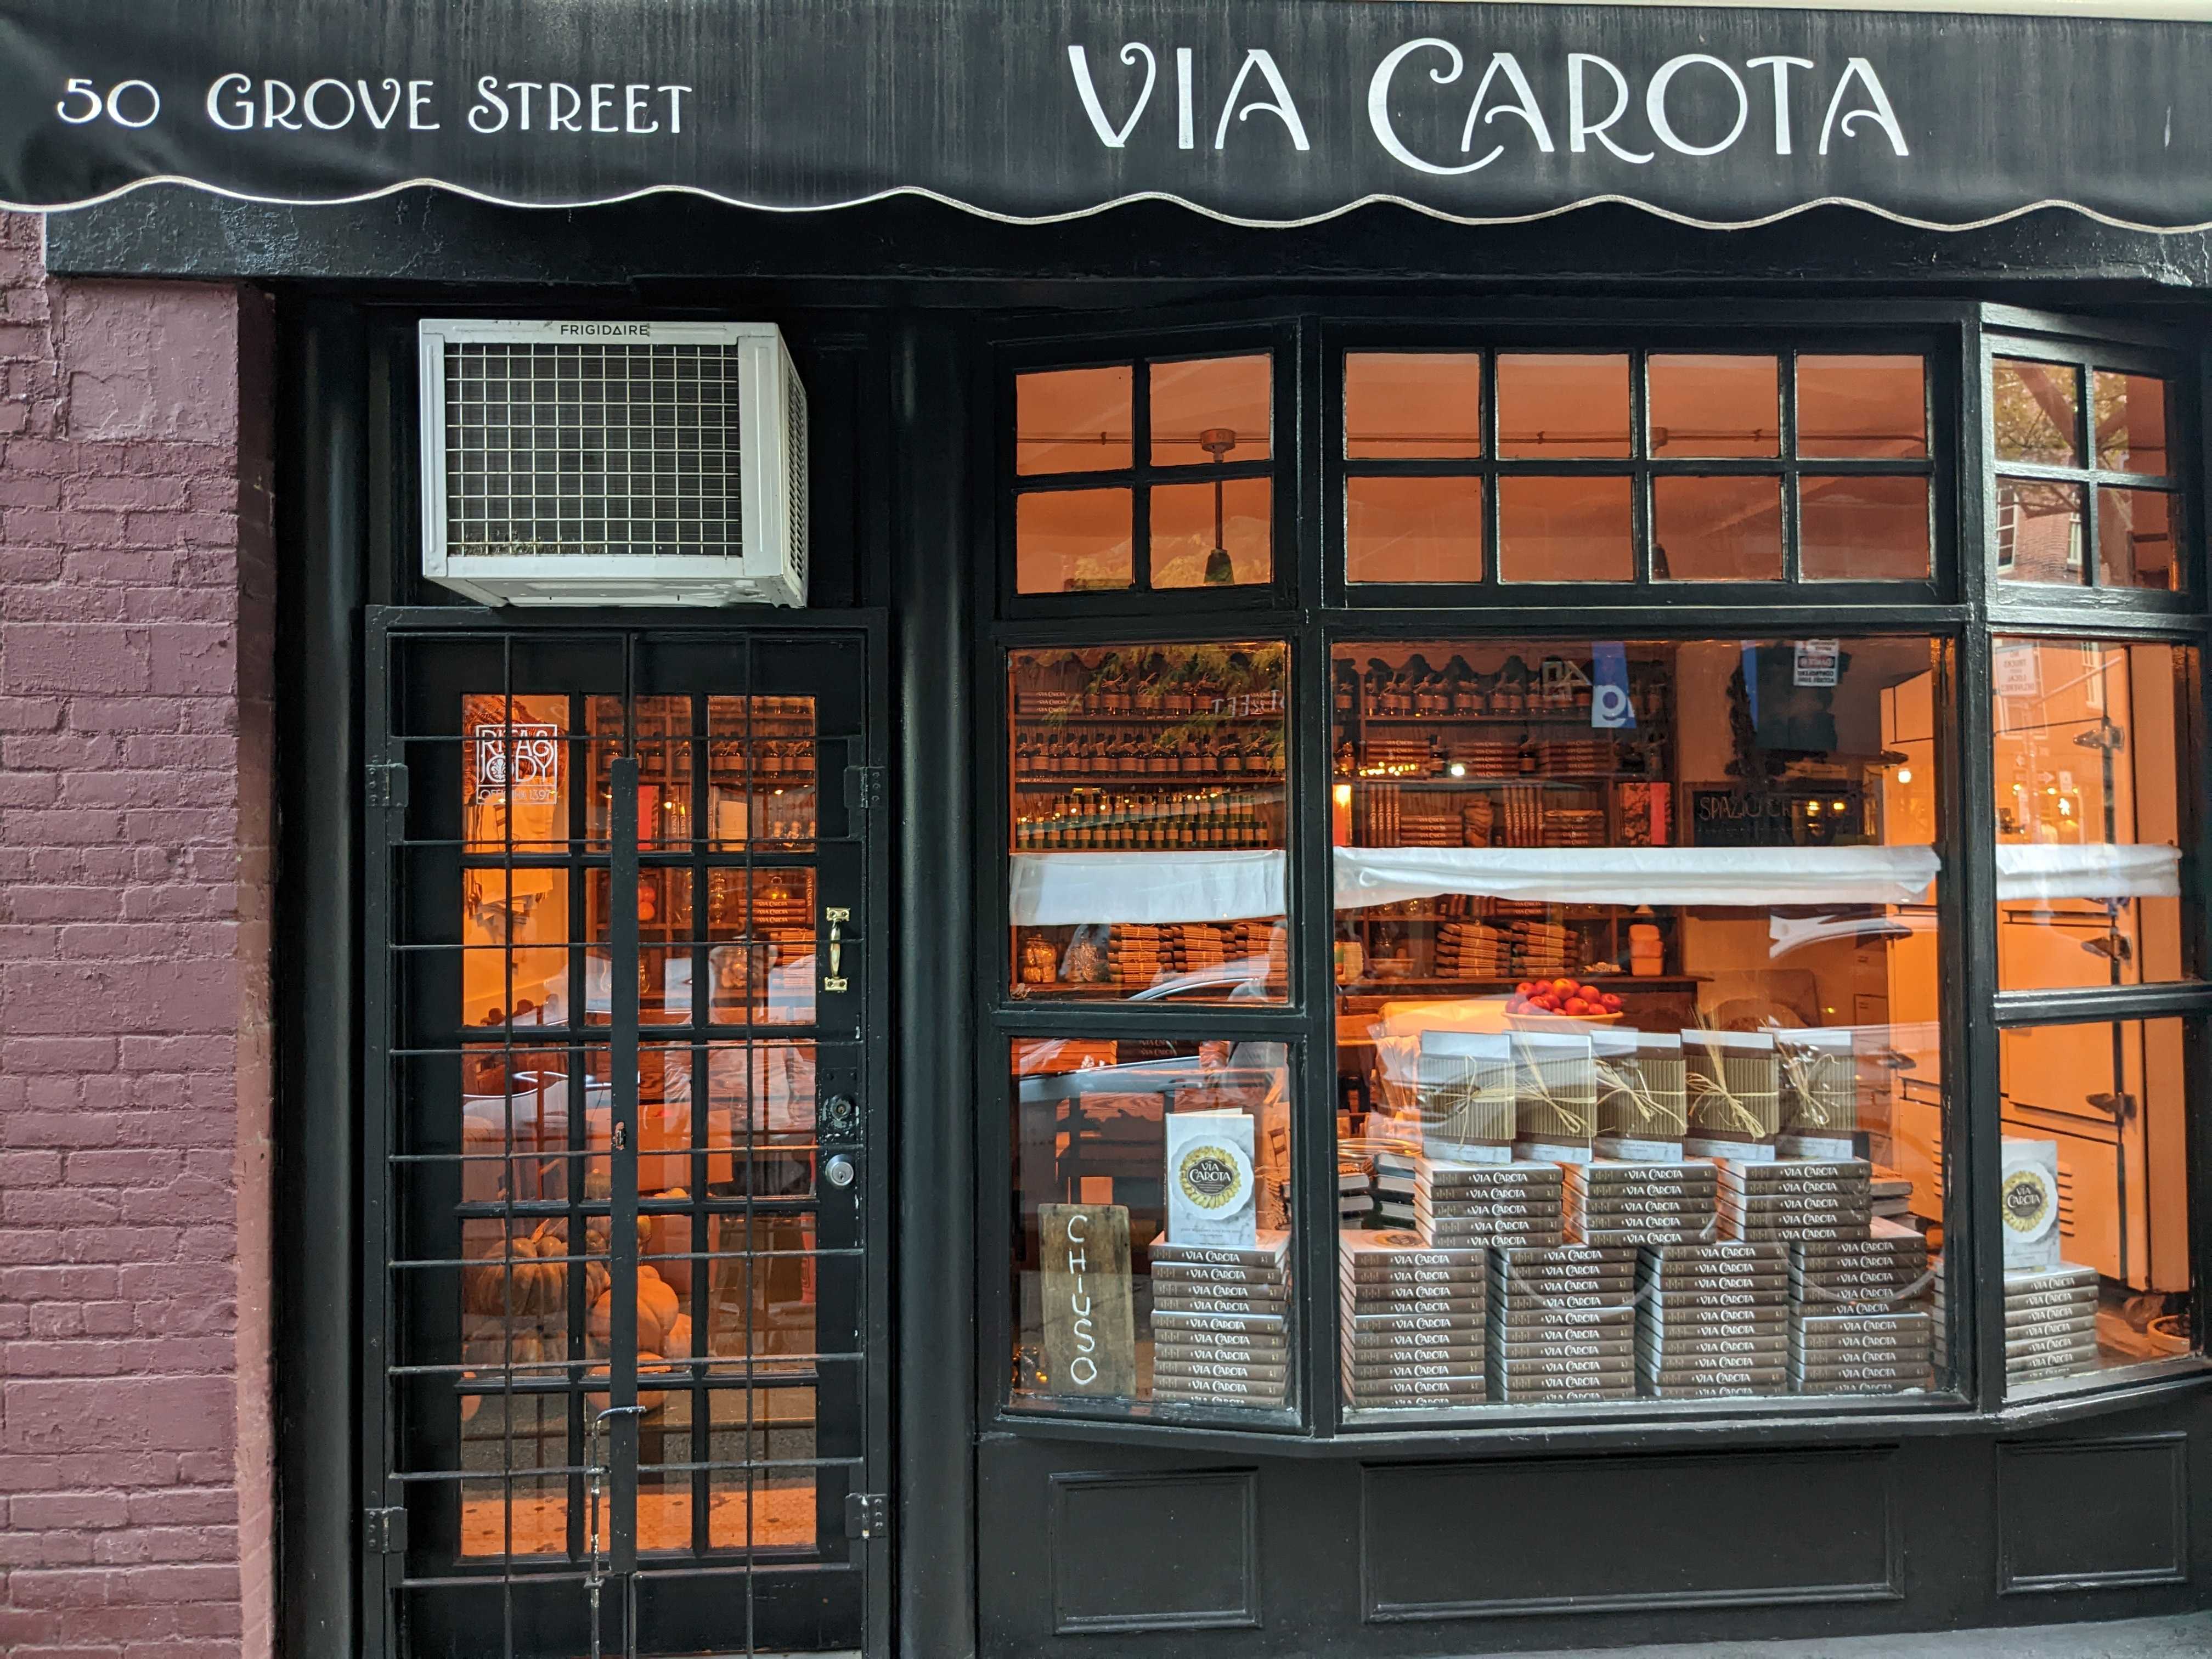 A store front with Via Carota’s name with is displayed with the address 50 Grove Street.